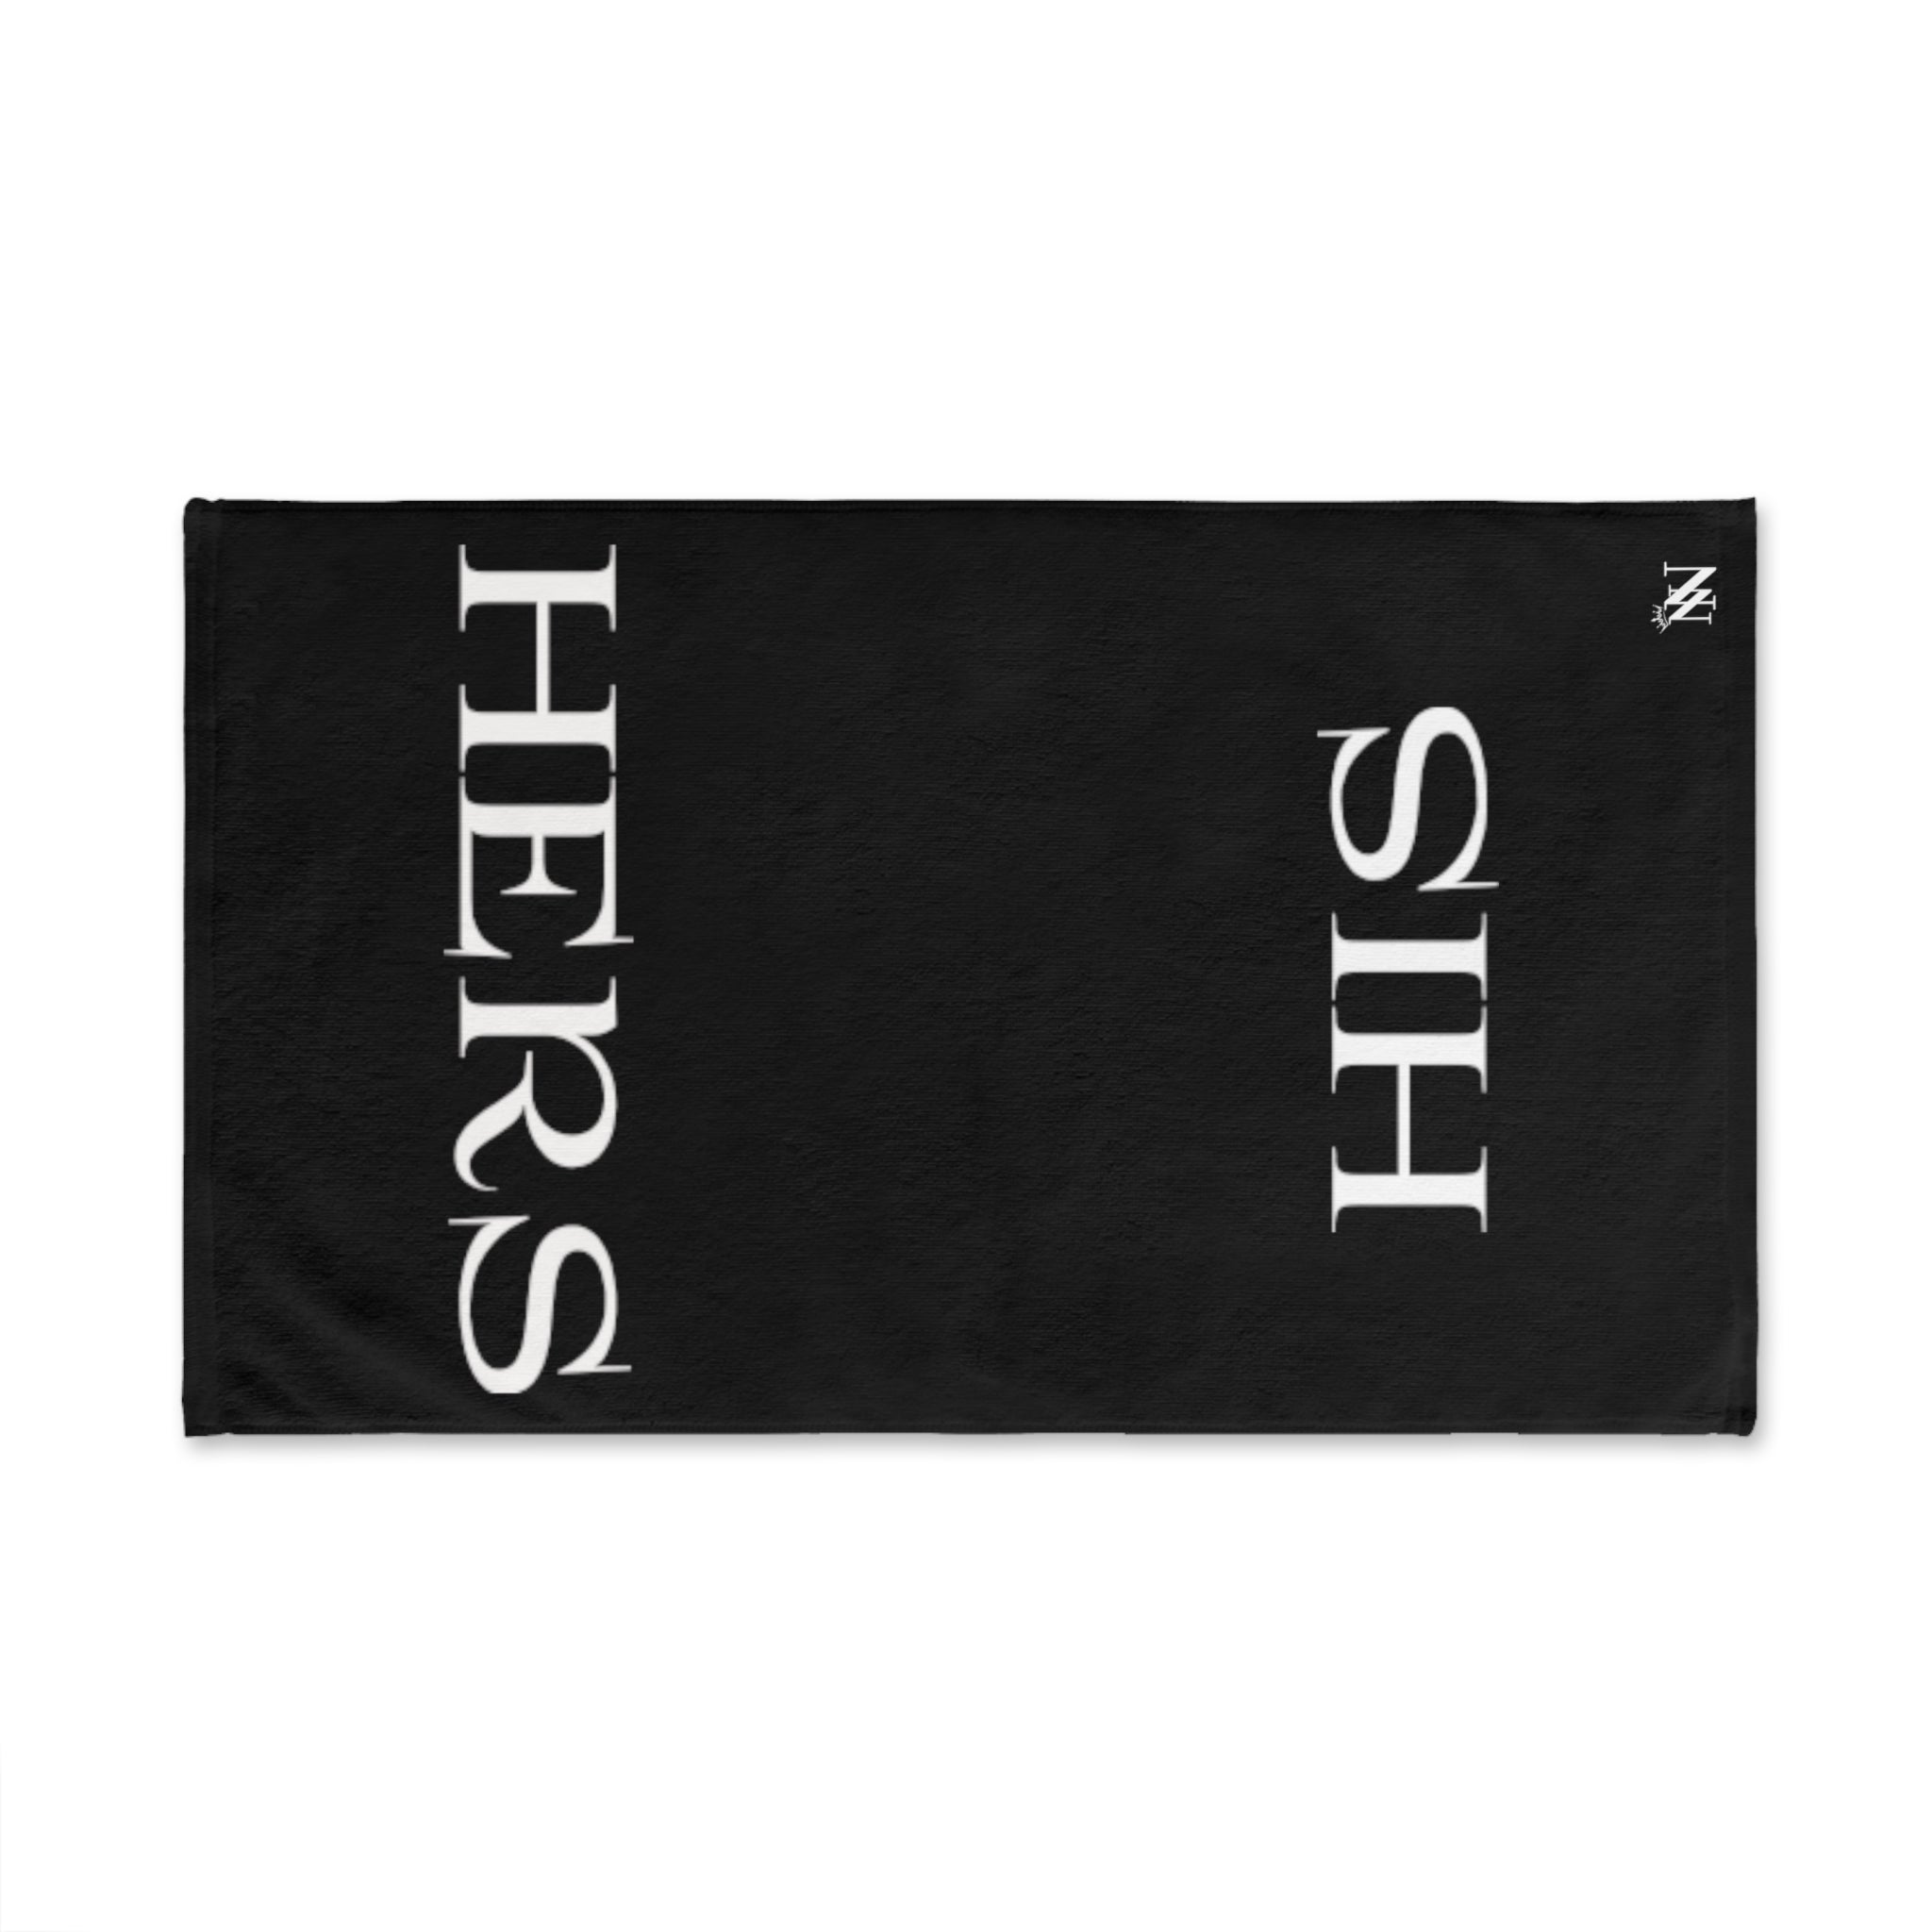 His Hers Black | Sexy Gifts for Boyfriend, Funny Towel Romantic Gift for Wedding Couple Fiance First Year 2nd Anniversary Valentines, Party Gag Gifts, Joke Humor Cloth for Husband Men BF NECTAR NAPKINS